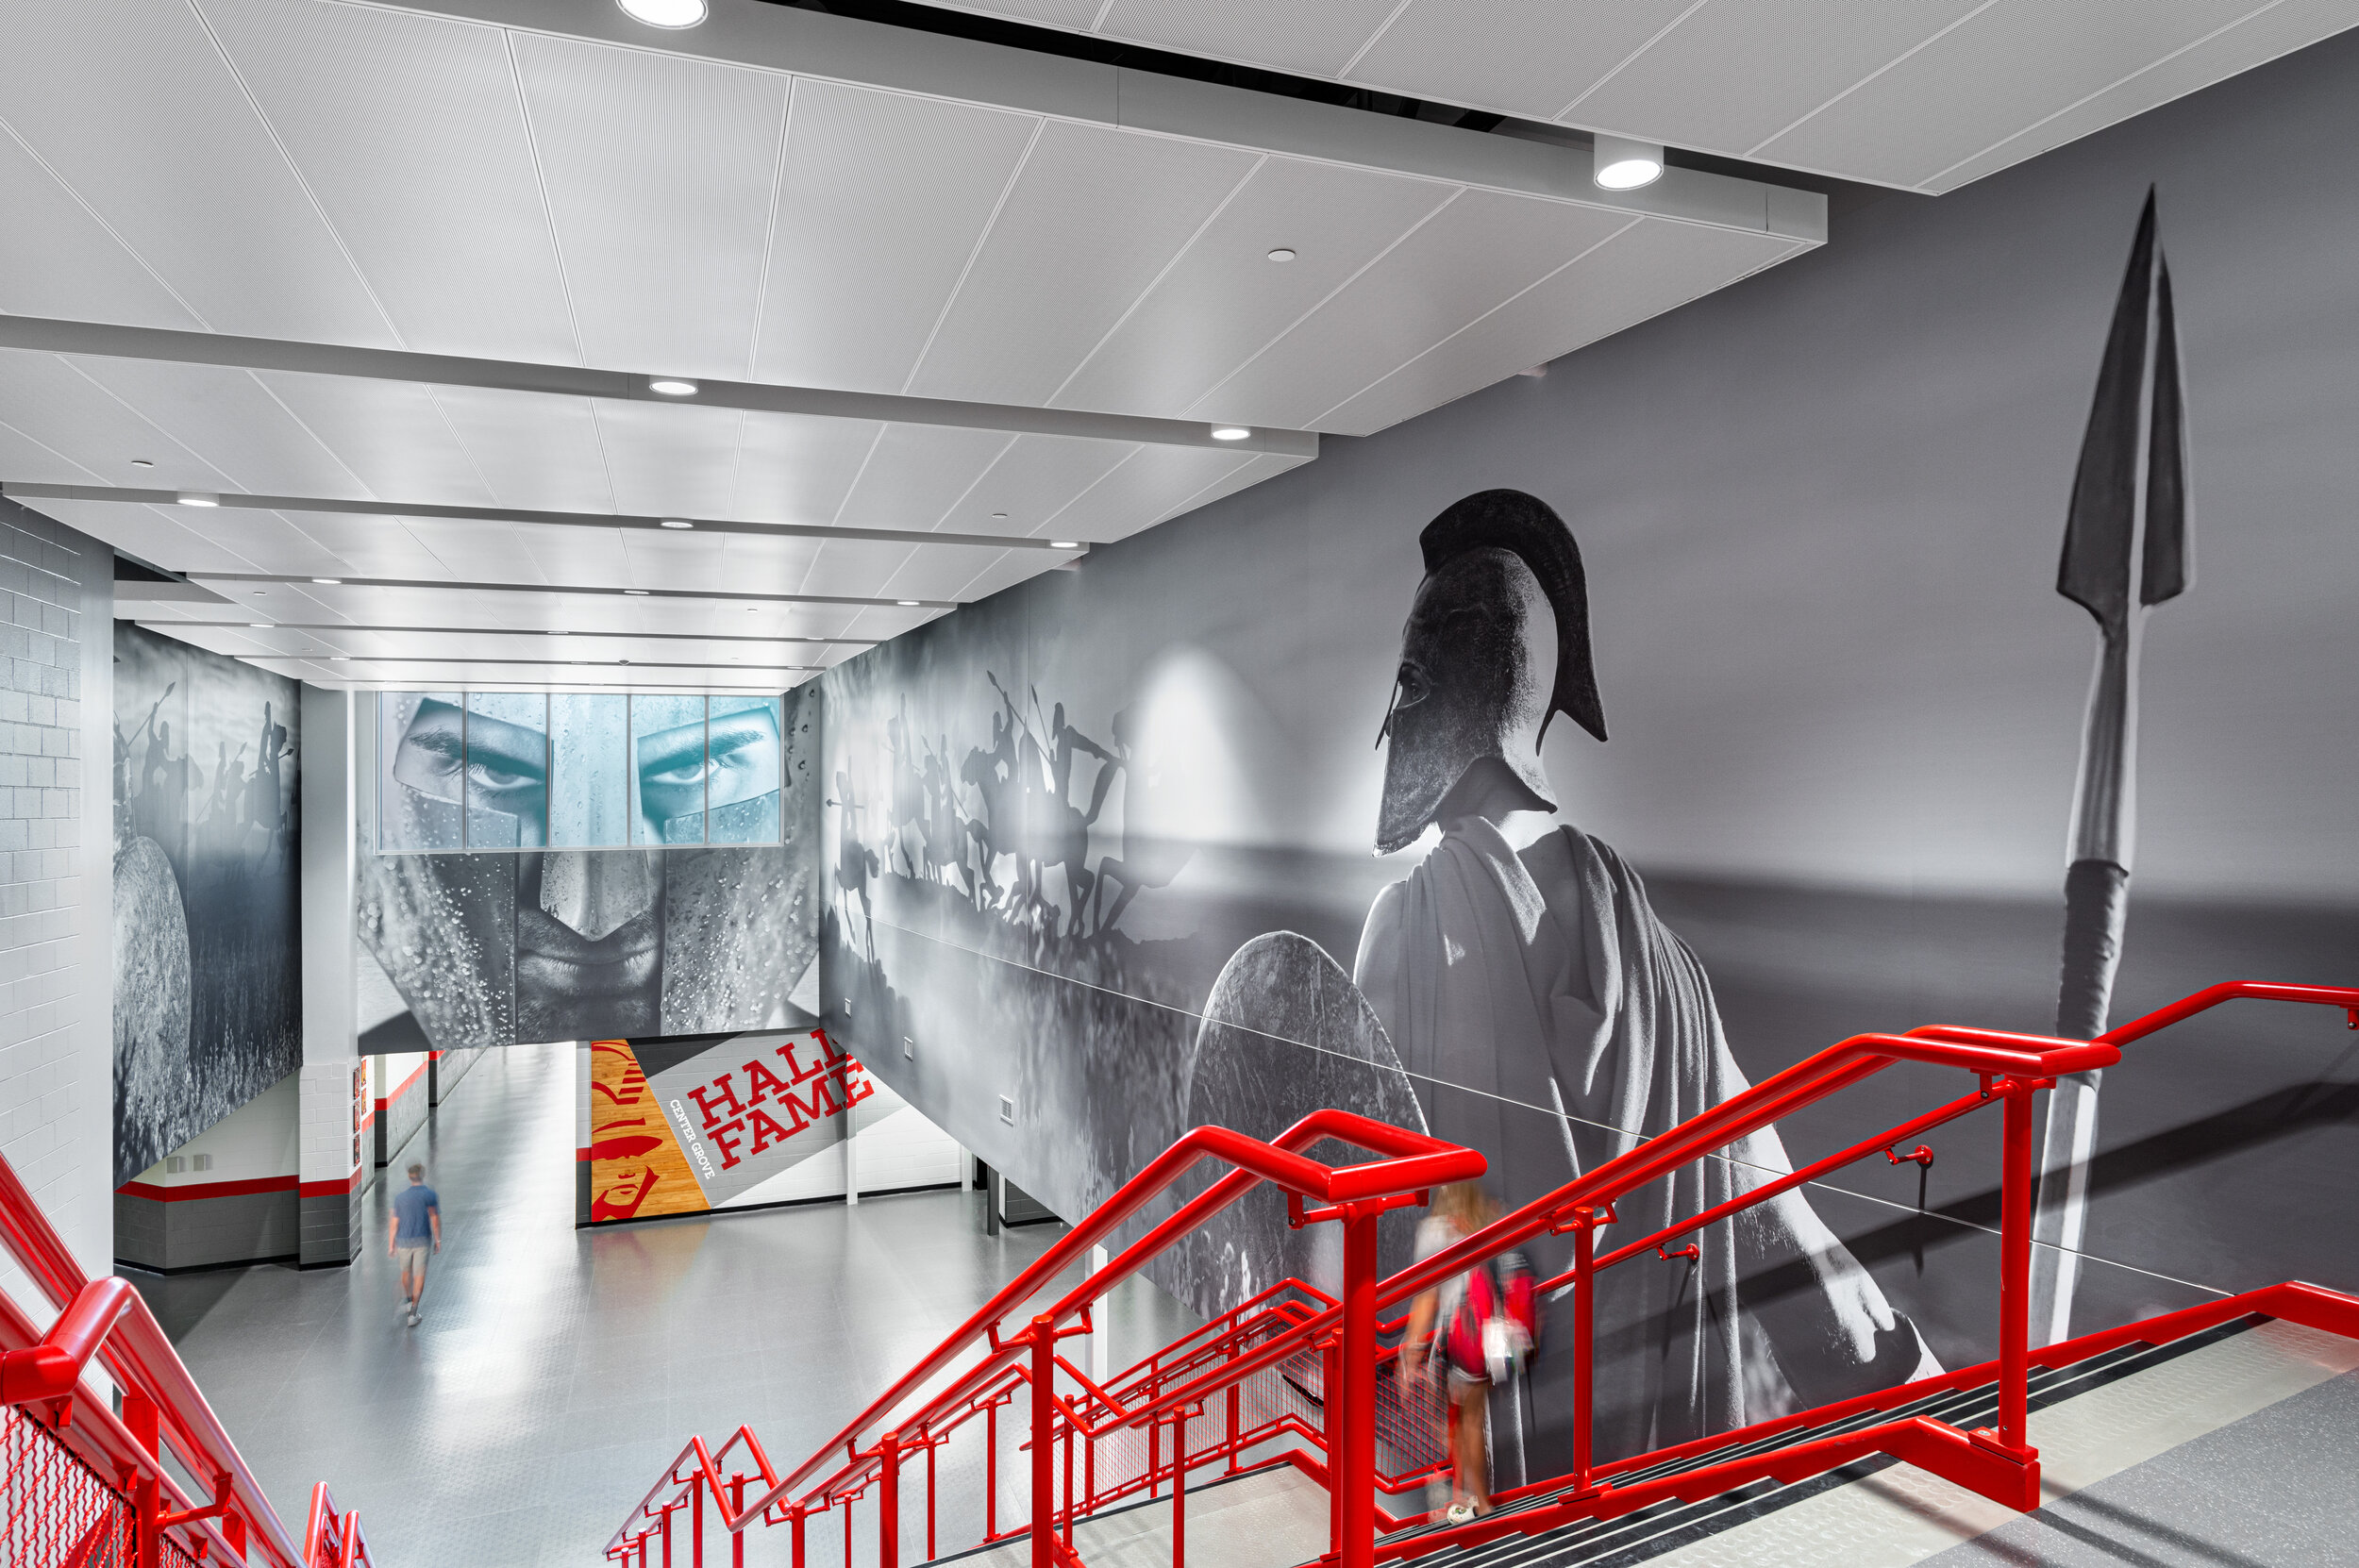 An architectural photography of red handrails and a hall with photos of a Greek warrior.